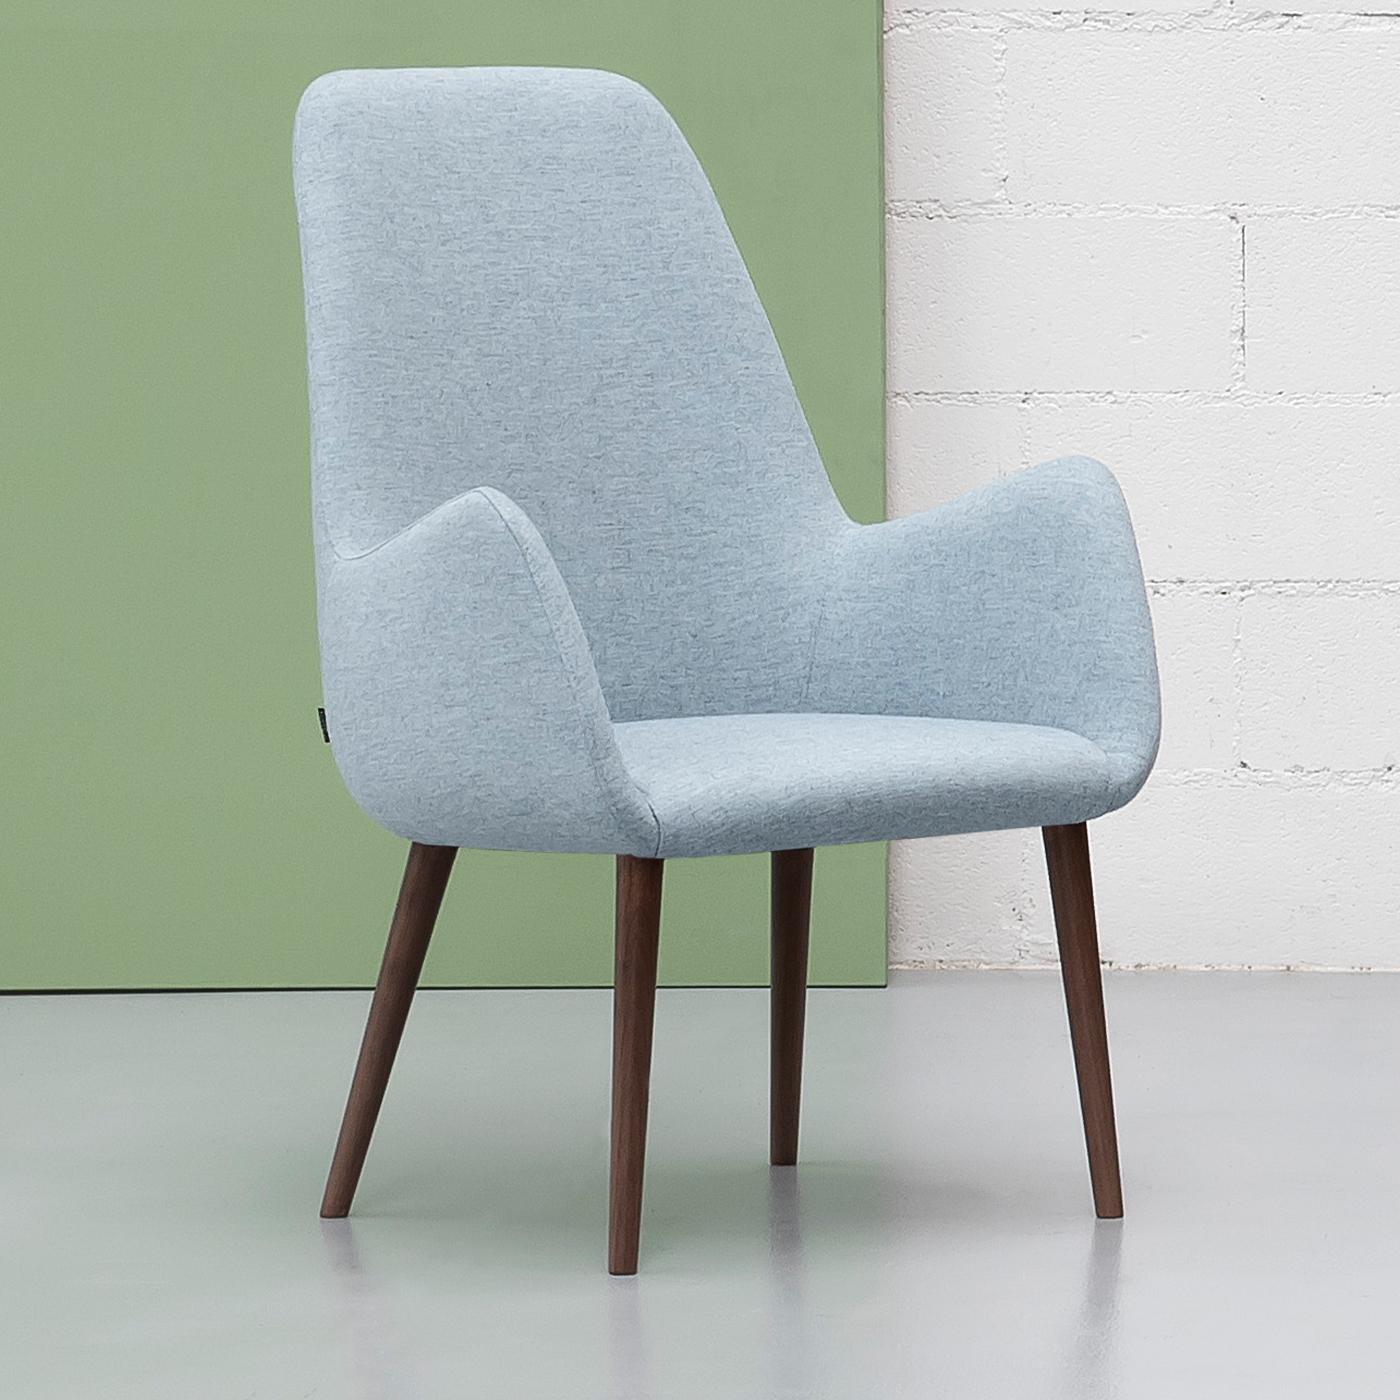 Designed by Carlesi & Tonelli, this plush armchair from the Kesy Collection creates a snug, cozy space while adding a stylish accent to any contemporary interior decor. Supported by four walnut-stained ash wood legs, the sophisticated and modern